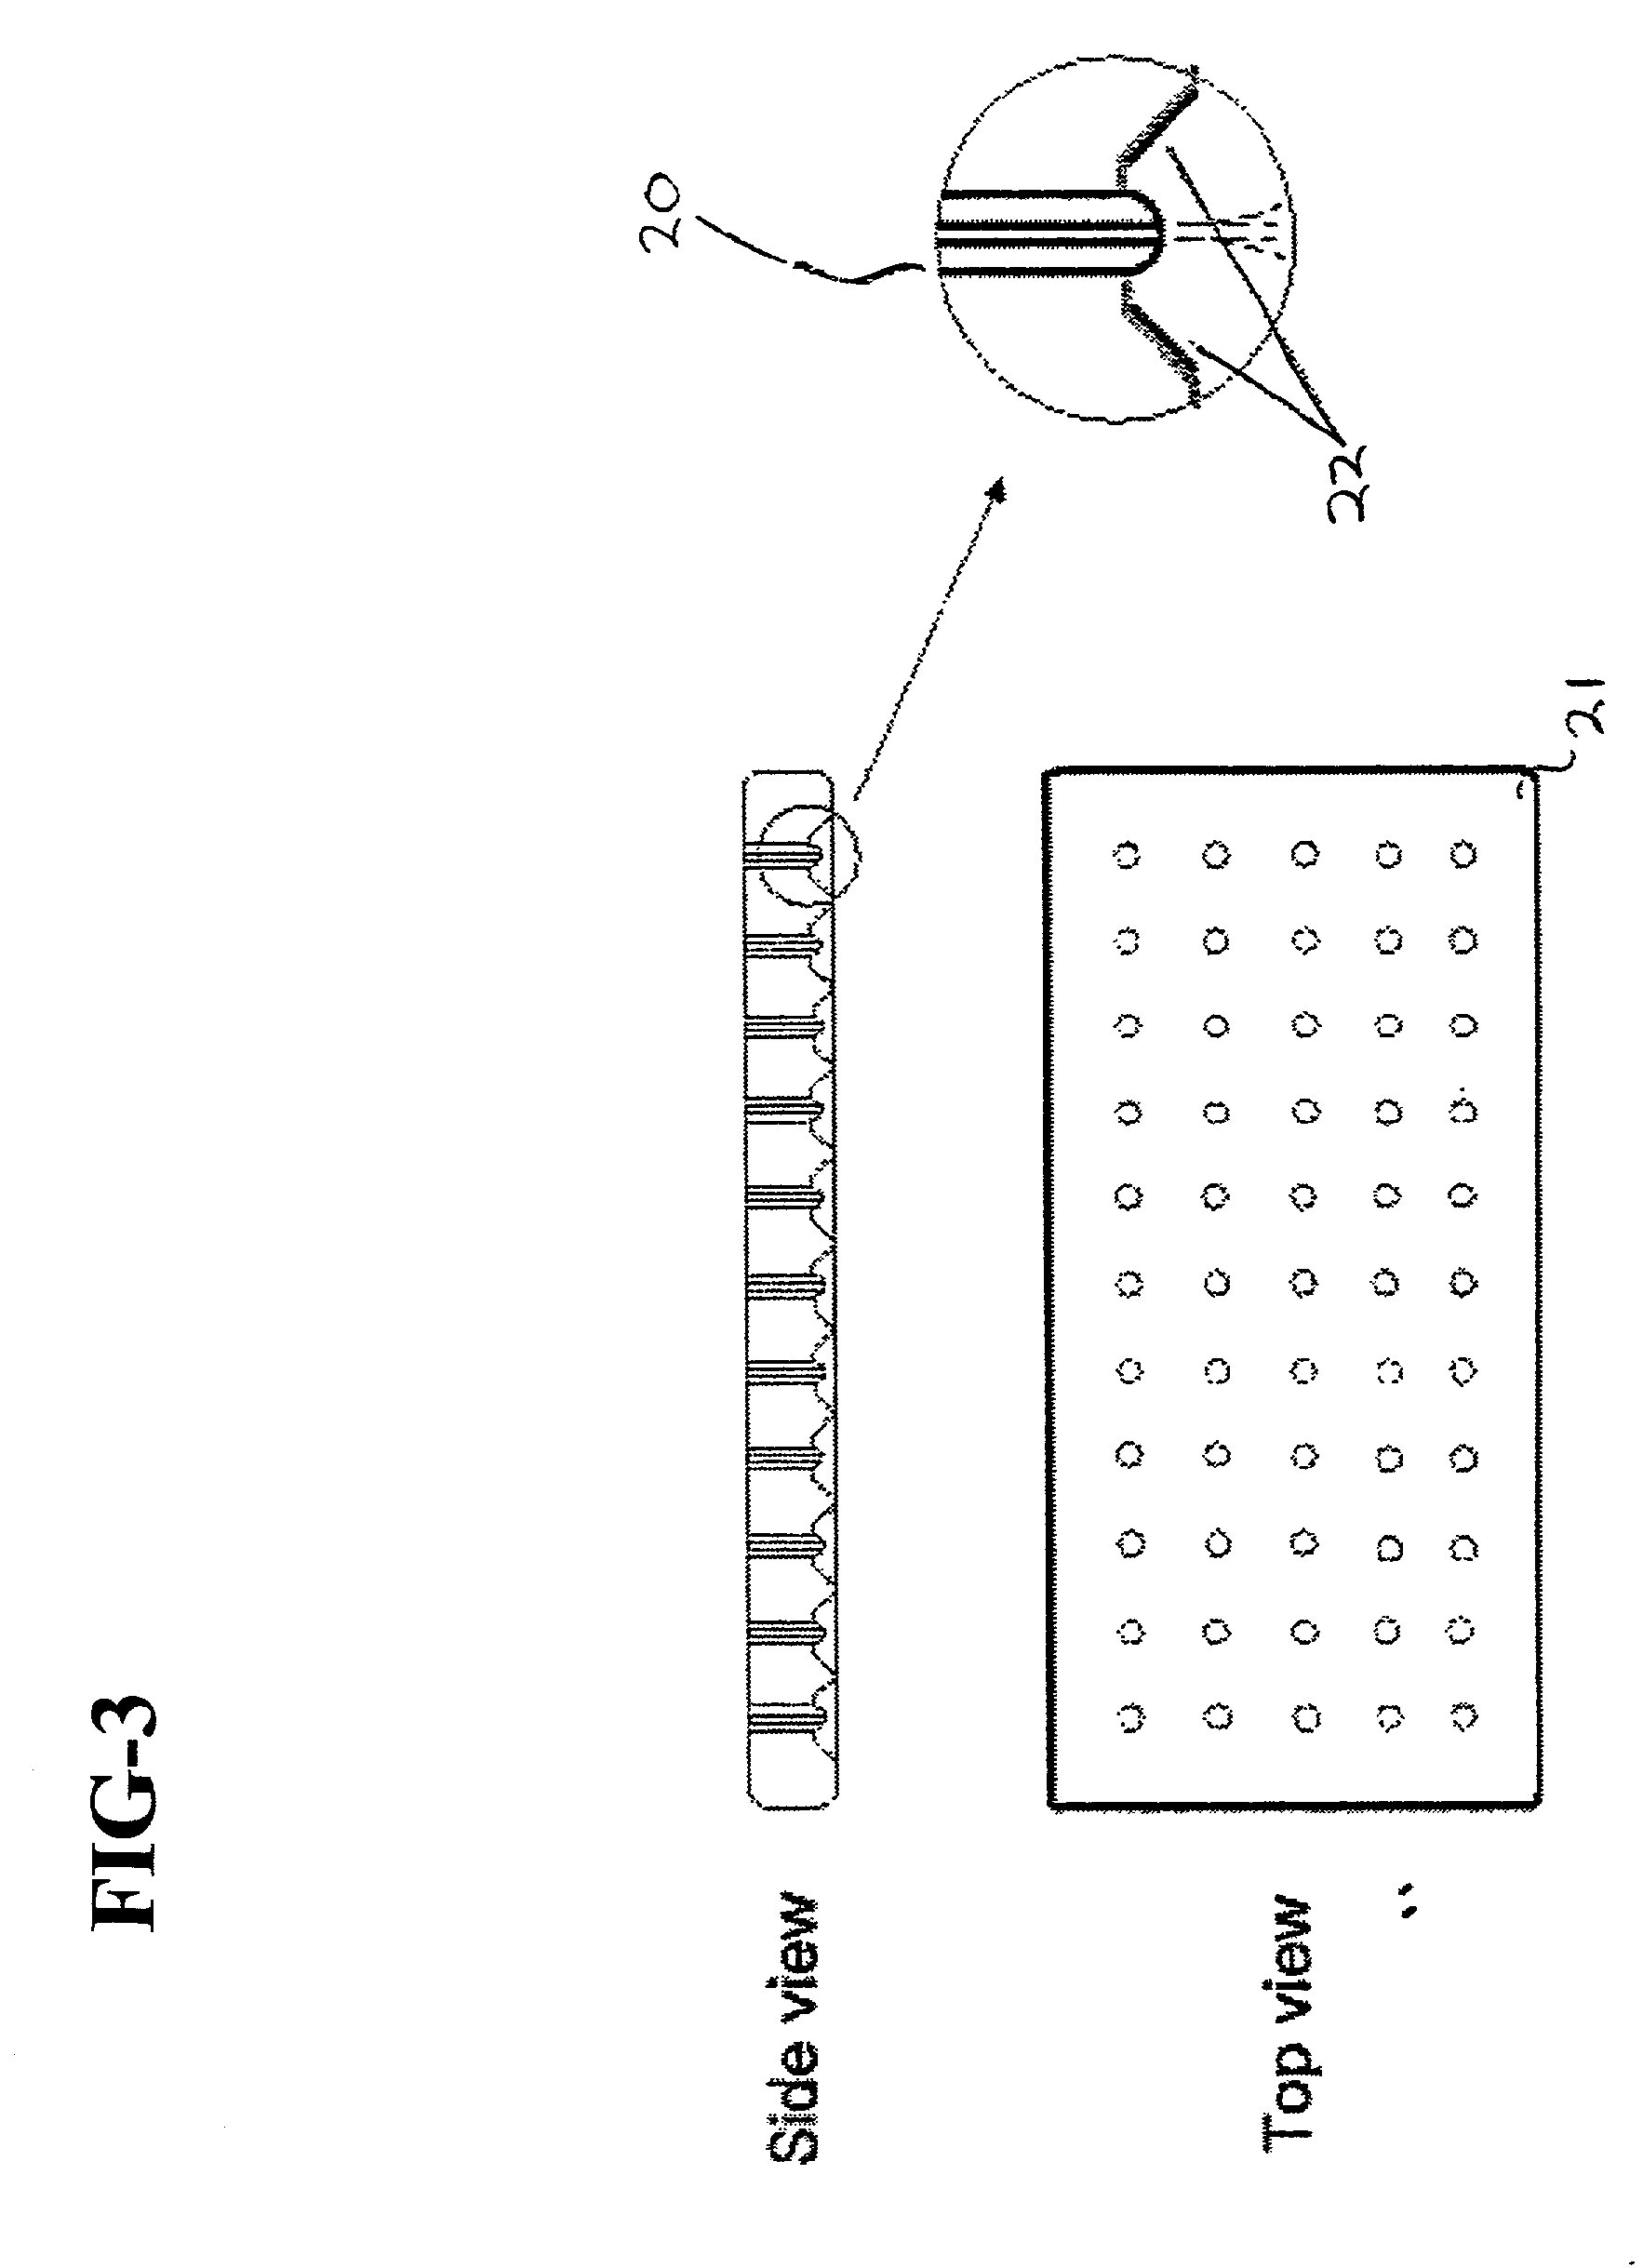 Cell storage and delivery system